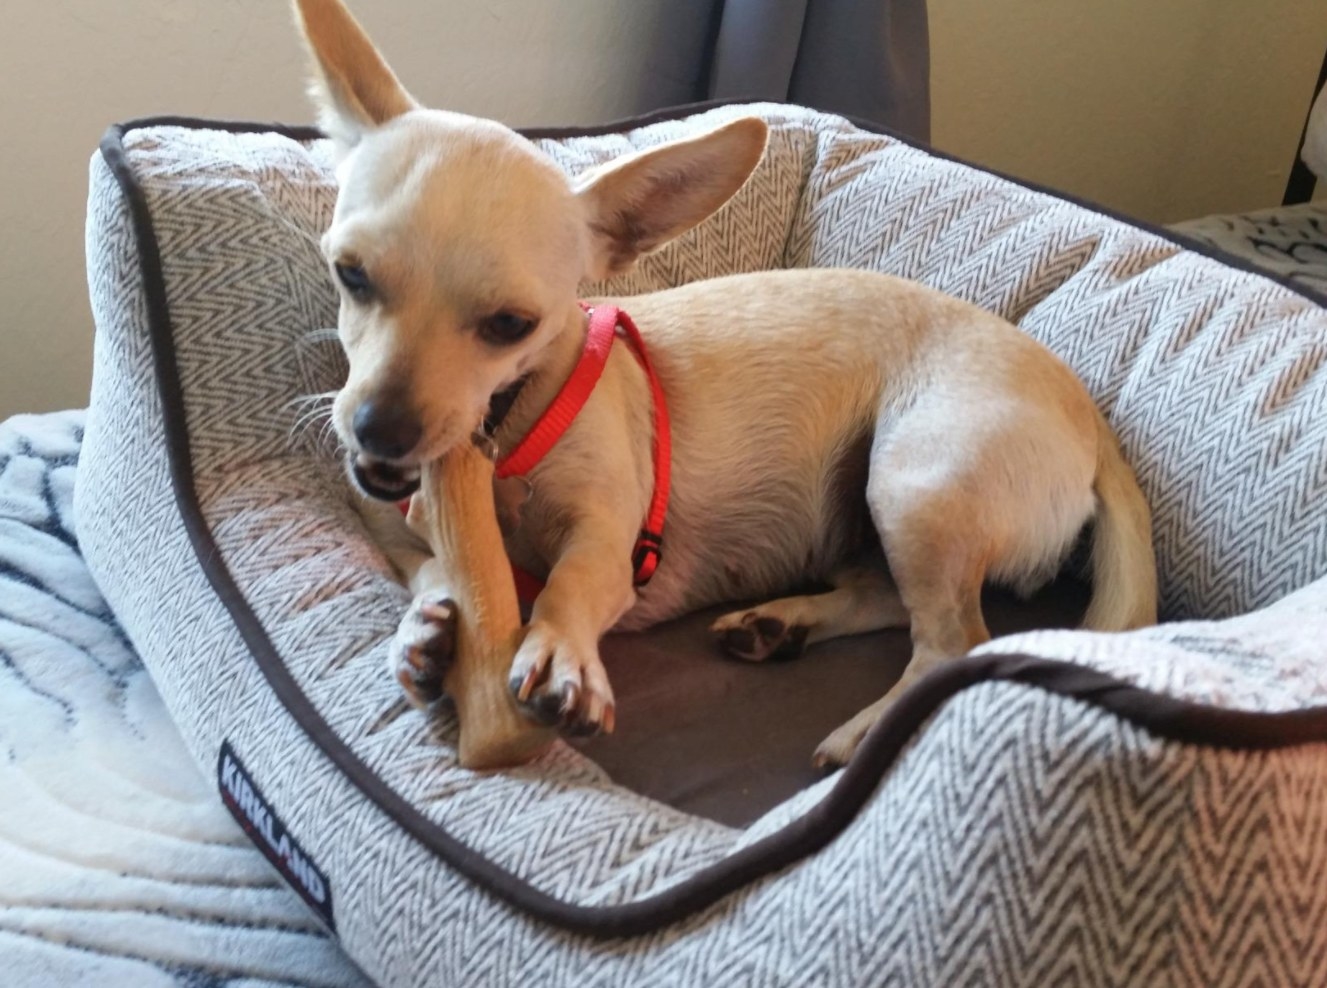 A chihuahua chewing on the stick toy